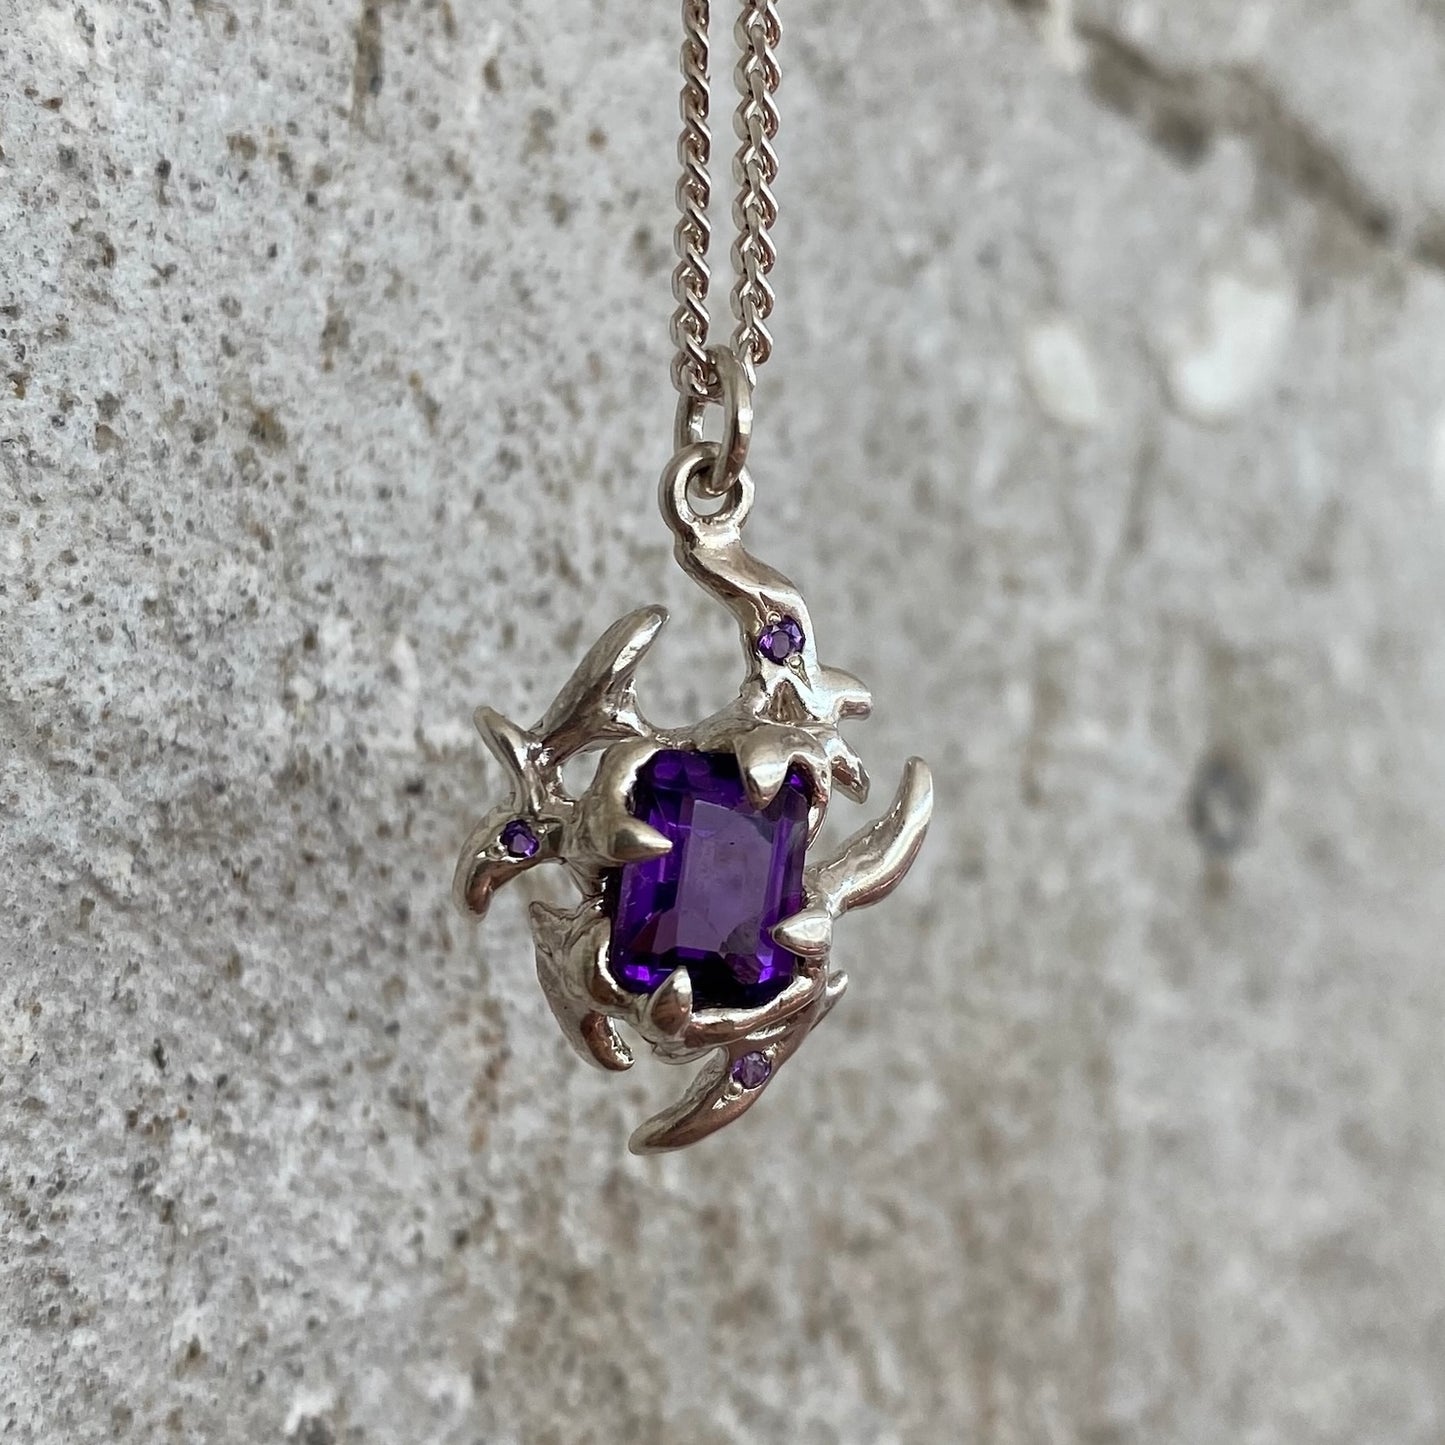 Maxi KHAOS sterling silver and 4 Amethysts necklace IV